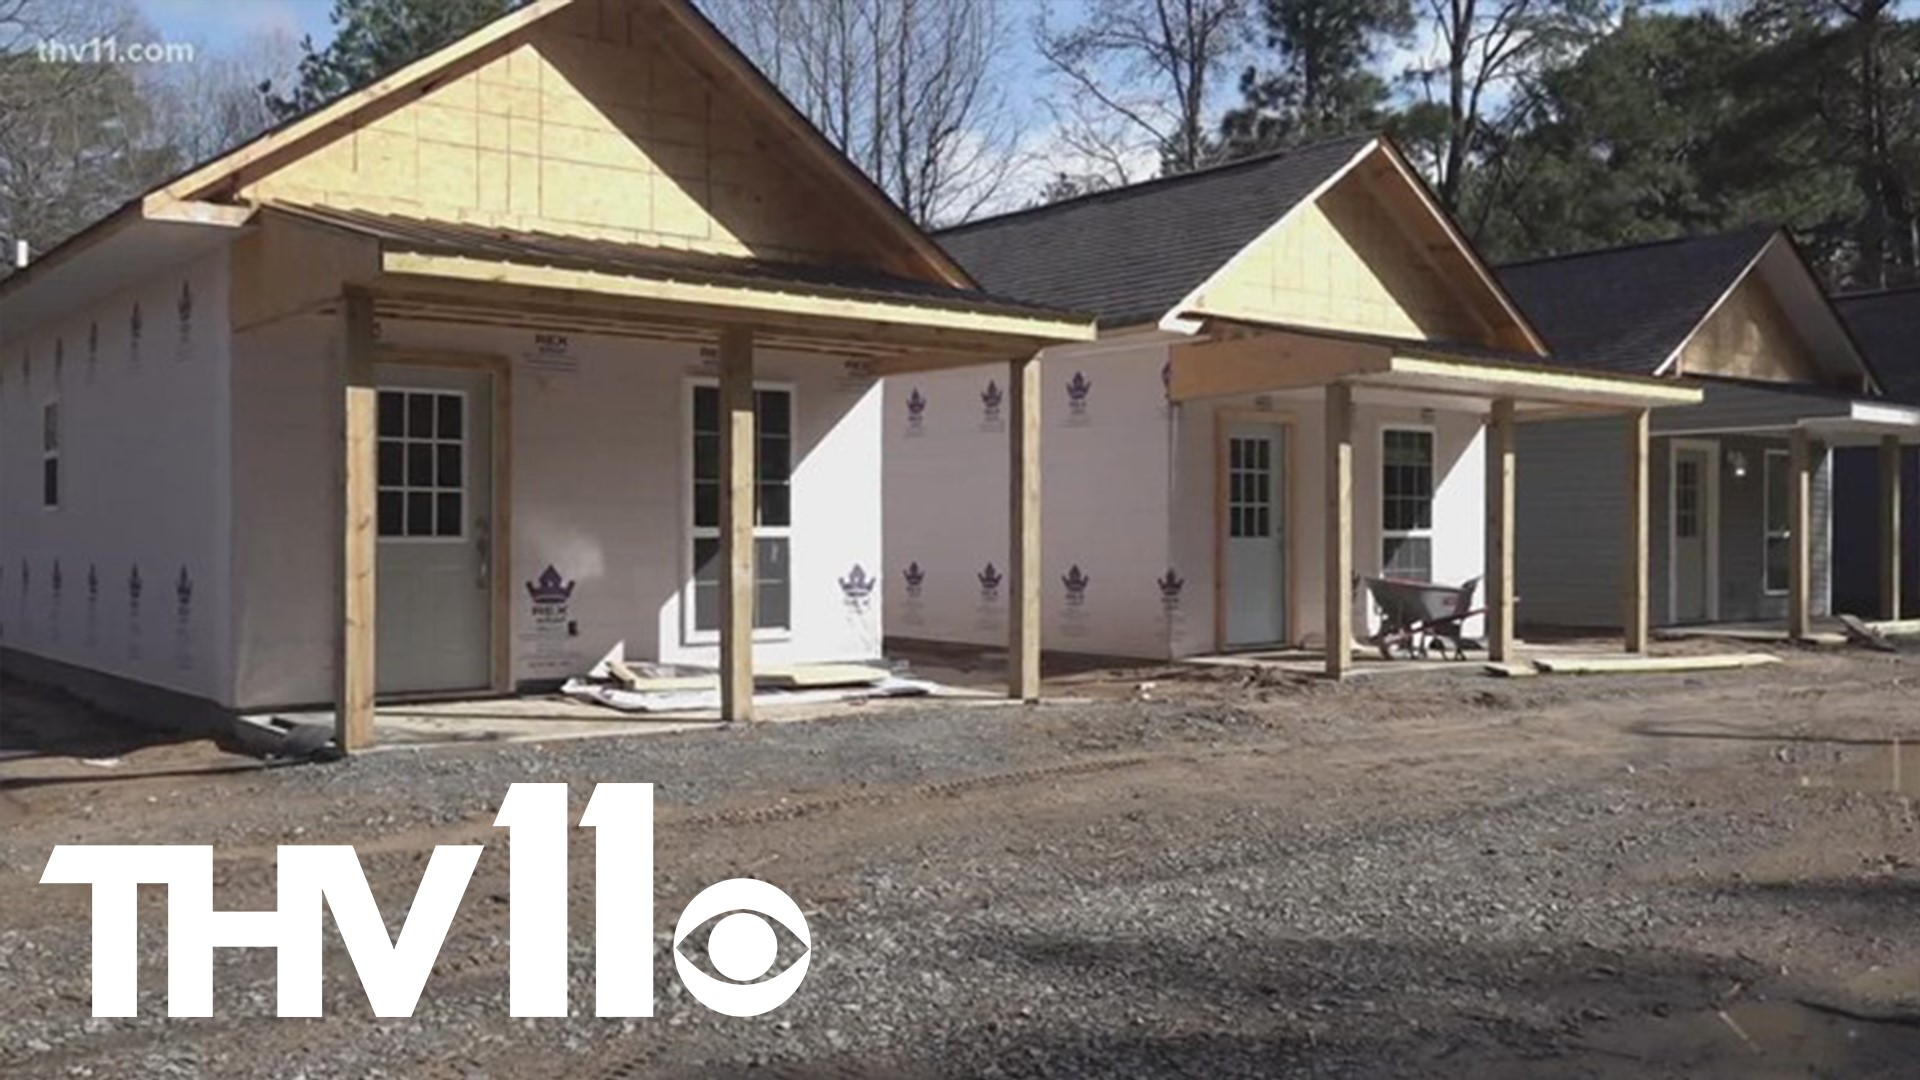 Finding a house in your price range can be a challenge for a lot of people. Some city leaders in Pine Bluff believe tiny homes are the affordable answer.